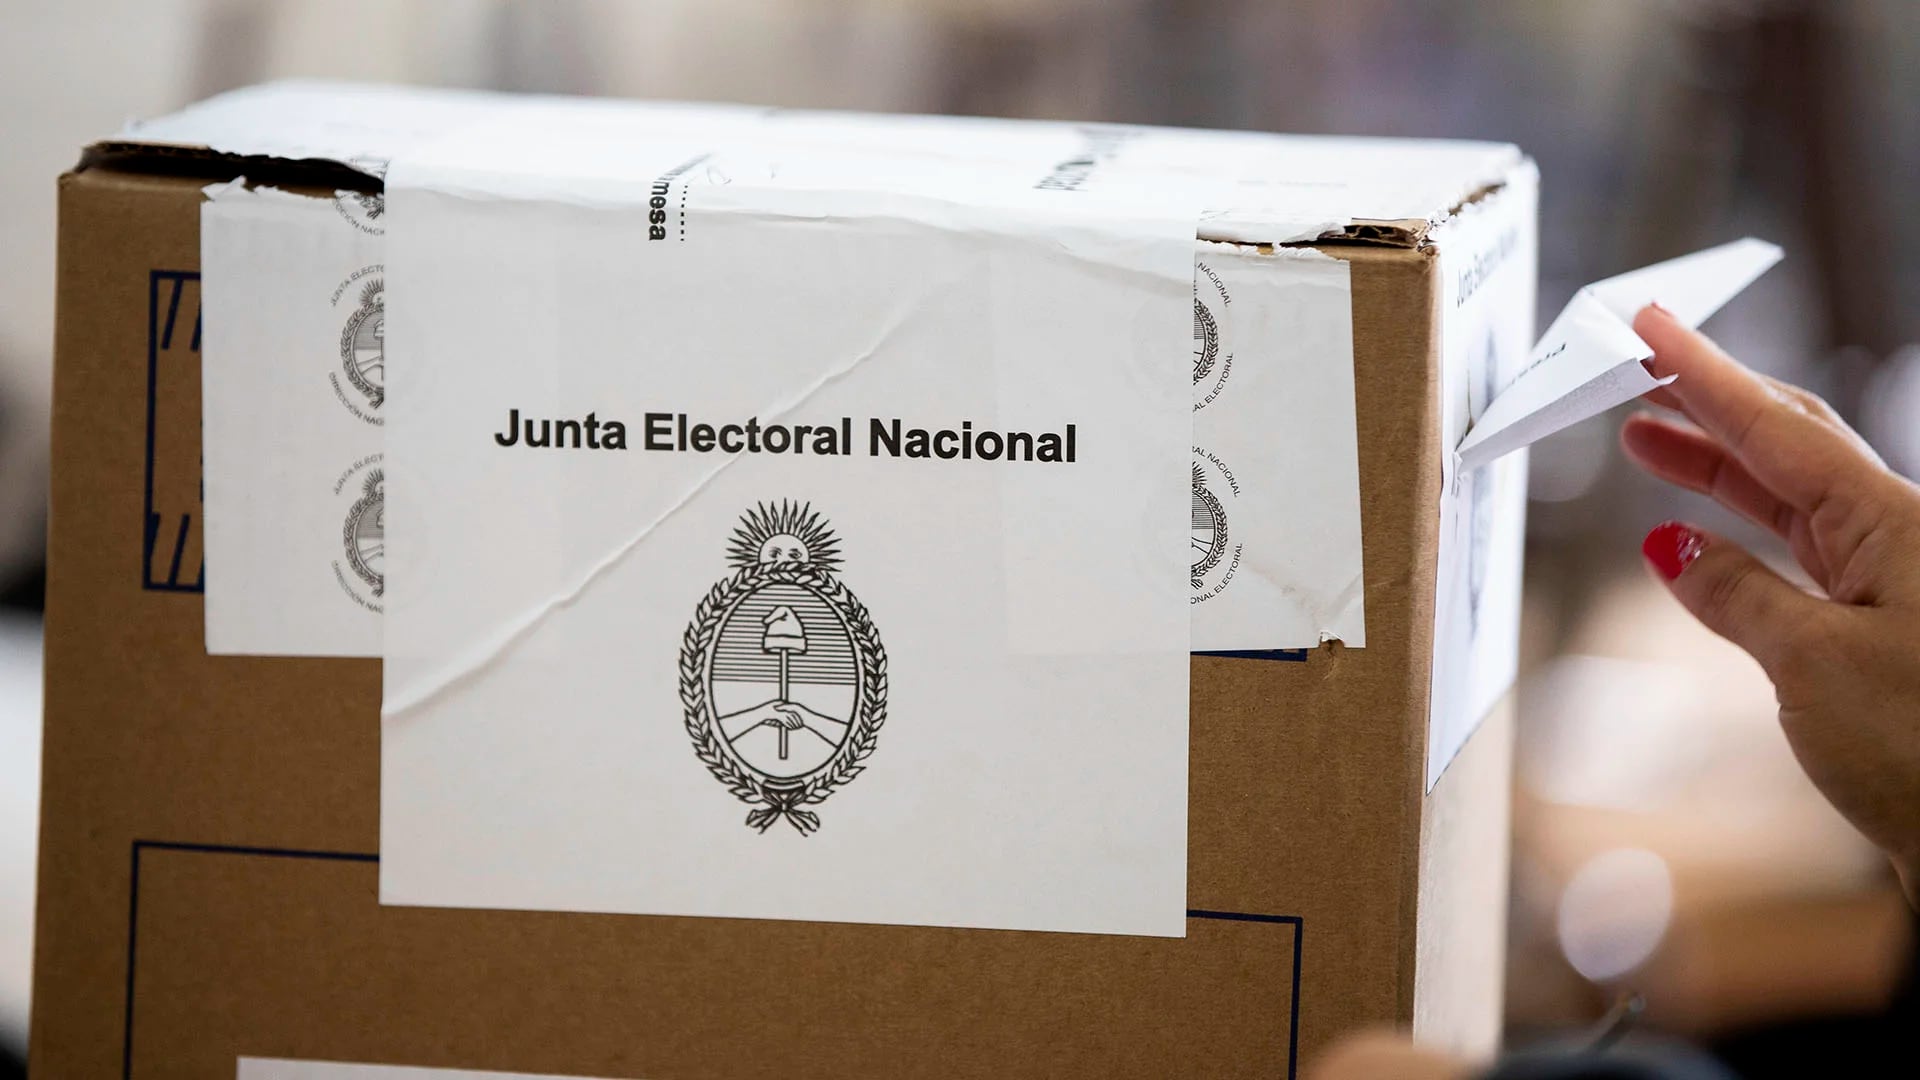 A woman casts her vote at a polling during primary elections in Buenos Aires, Argentina, Sunday, Aug. 11, 2019. Argentina is holding primary elections Sunday which are expected to provide a hint of who might win ahead of October's presidential elections. (AP Photo/Tomas F. Cuesta)